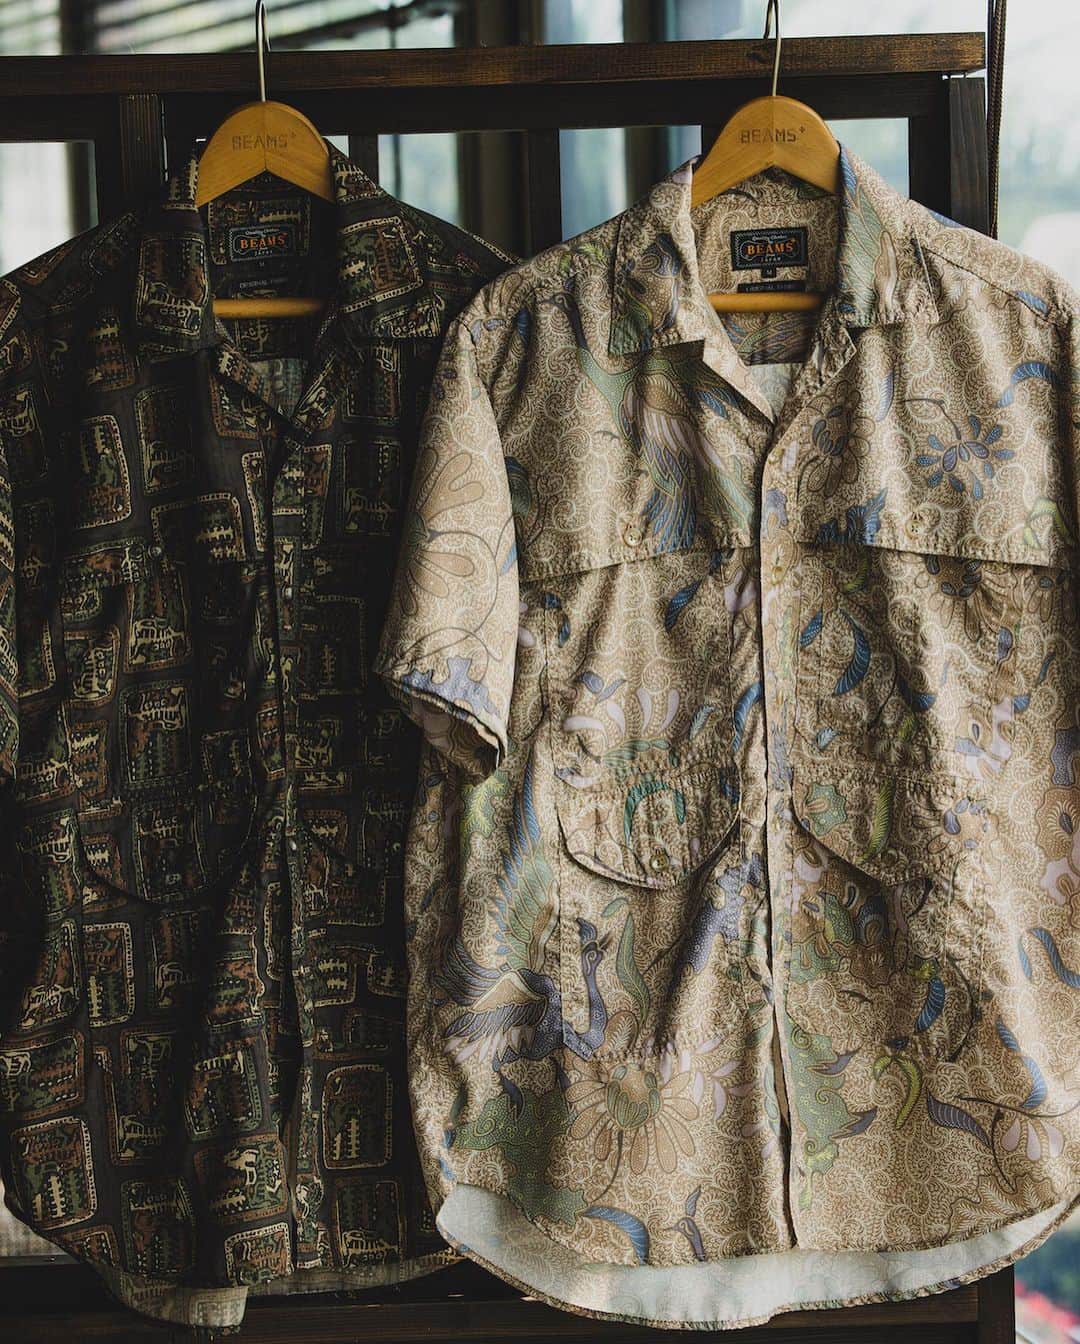 BEAMS+さんのインスタグラム写真 - (BEAMS+Instagram)「... Introducing the 'Adventure Shirt II' with pockets inspired by outdoor style, and the 'MIL Utility Shorts' with hidden pocket work hidden beneath a basic design.  ---------- ●Adventure Shirt ⅡPolyester Broad Animal Print_ We used a recycled polyester material that offers a lightweight and textured feel, as well as excellent moisture-wicking properties. The vintage shirt pattern is vividly reproduced with inkjet printing. The design features a double yoke across the front shoulders to the chest, and pockets that also serve as glass holders, making it packed with pocket details. The relaxed fit provides a comfortable and relaxed feel.  ●MIL Utility Shorts Back Sateen_  With its seemingly basic appearance, the hidden pocket gimmick in both the front and back has been highly acclaimed by the BEAMS PLUS Crew. Inspired by the U.S. Army's commonly known "Baker Pants," this item features an update with double pockets on the front and back patch pockets. It's a secret pocket that only the wearer knows, not visible to the eye. The material used is cotton back satin, which has been washed, wrinkled, and pounded to achieve a worn-in texture and softness. Combined with its rugged silhouette, these military shorts are truly captivating.  アウトドアスタイルのポケットワークを落とし込んだ『Adventure Shirt Ⅱ』とベーシックなデザインに隠されたポケットワークが魅力な『MIL Utility Shorts』 ---------- ●Adventure Shirt ⅡPolyester Broad Animal Print 素材は、軽い着心地と質感、そして吸水速乾性に長けたリサイクルポリエステル素材を使用しました。インクジェットプリントで、ビンテージシャツの柄を鮮明に再現。 前身頃の肩から胸にかけて2重のヨークを施したデザインや、グラスホルダーを兼ねたポケットなど、ポケットディテール満載。ゆったりとした着心地はリラックス感を演出できます。  ●MIL Utility Shorts Back Sateen 一見、ベーシックな見え方も、前後に隠されたポケットギミックがBEAMS PLUS Crewからも大好評。U.S.ARMYの通称『ベイカーパンツ』からインスピレーションしたアイテム。 フロントとバックのパッチポケットがどちらもダブルポケットの仕様にアップデート。見た目からはわからない。着用した者だけがわかる、秘密のポケット。 素材には、コットンバックサテンを採用しています。洗い、揉み、叩きと生地加工しており、着古されたような風合いと柔らかさが魅力。無骨なシルエットも相まったミリタリーショーツ。 . @beams_plus @beams_plus_harajuku @beams_plus_yurakucho #beamsplus」7月7日 19時28分 - beams_plus_harajuku